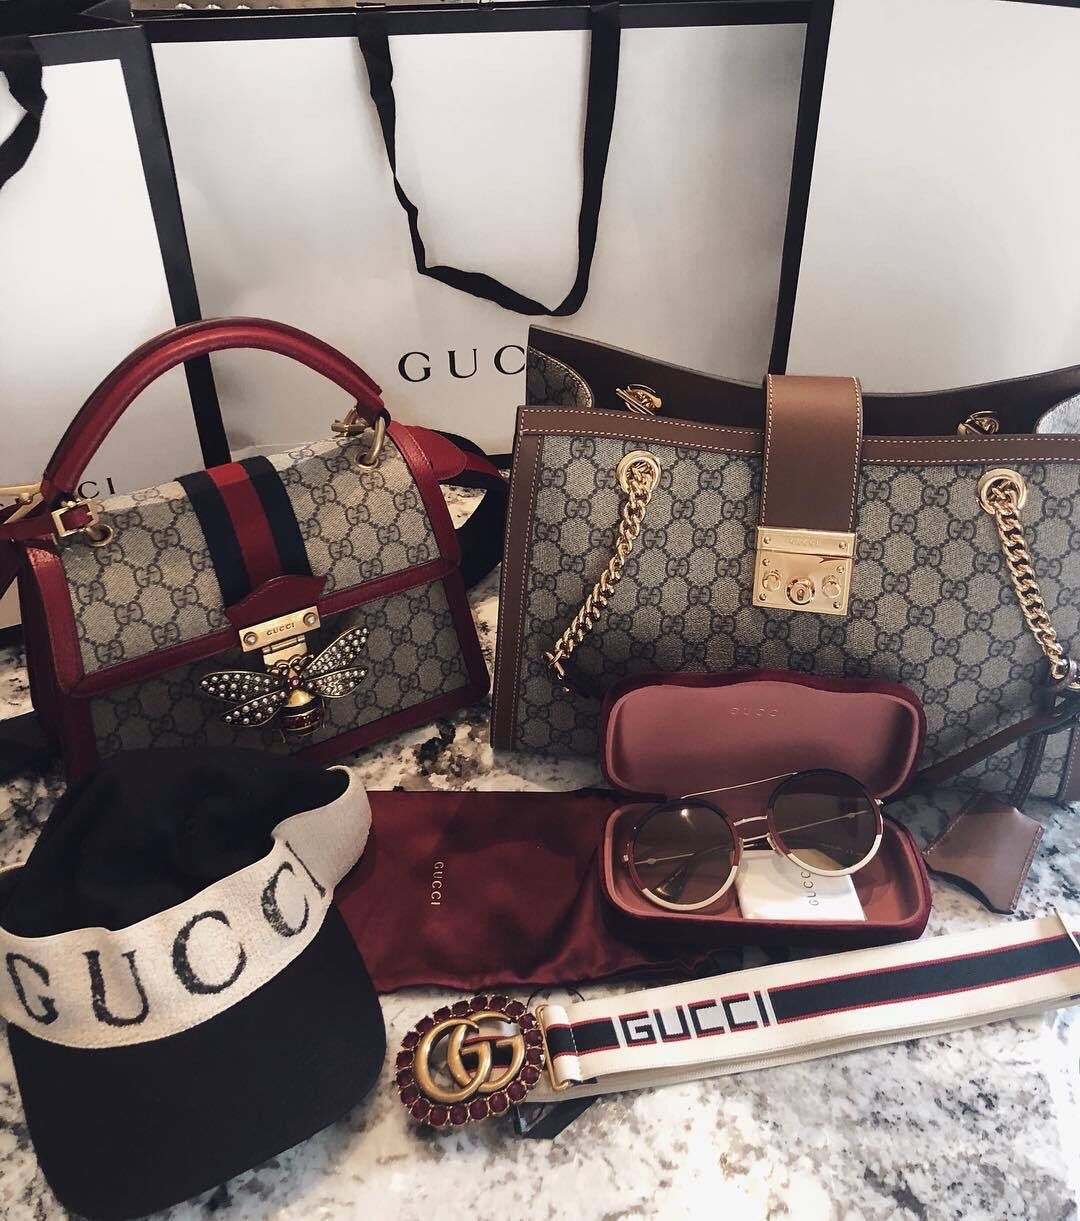 Gucci Remains Most Popular Online Brand